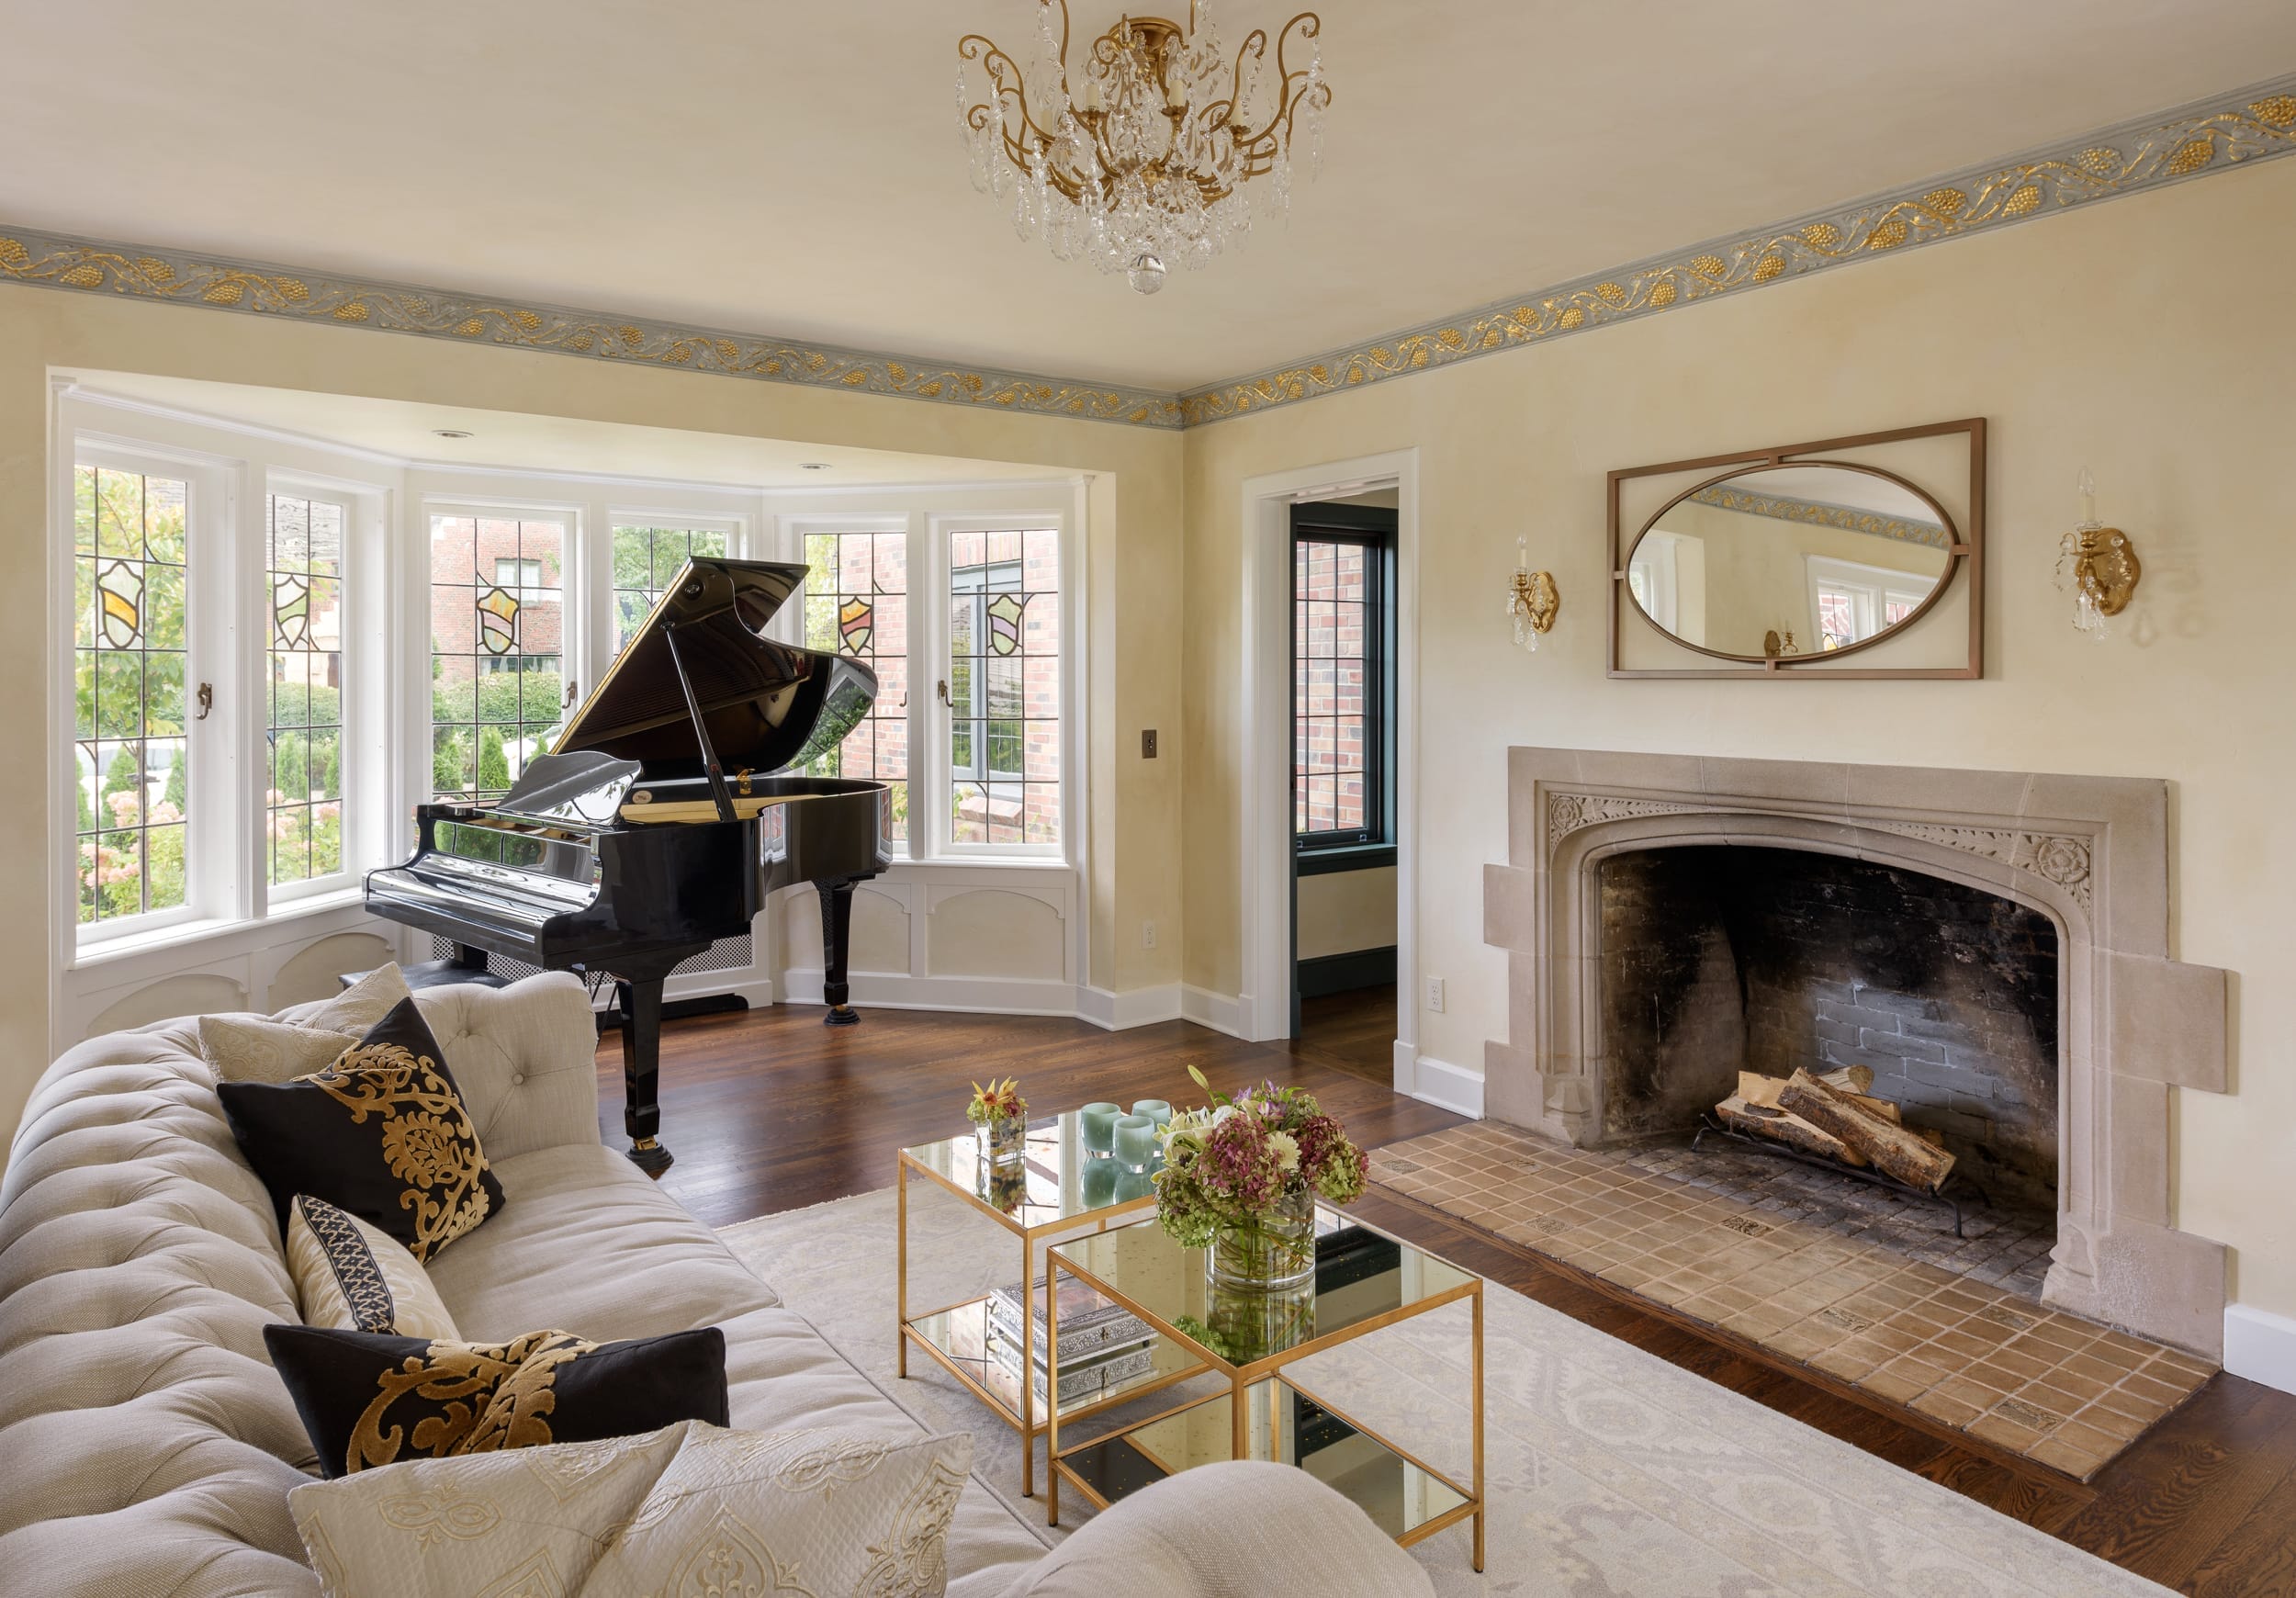 A living room with a piano and fireplace.